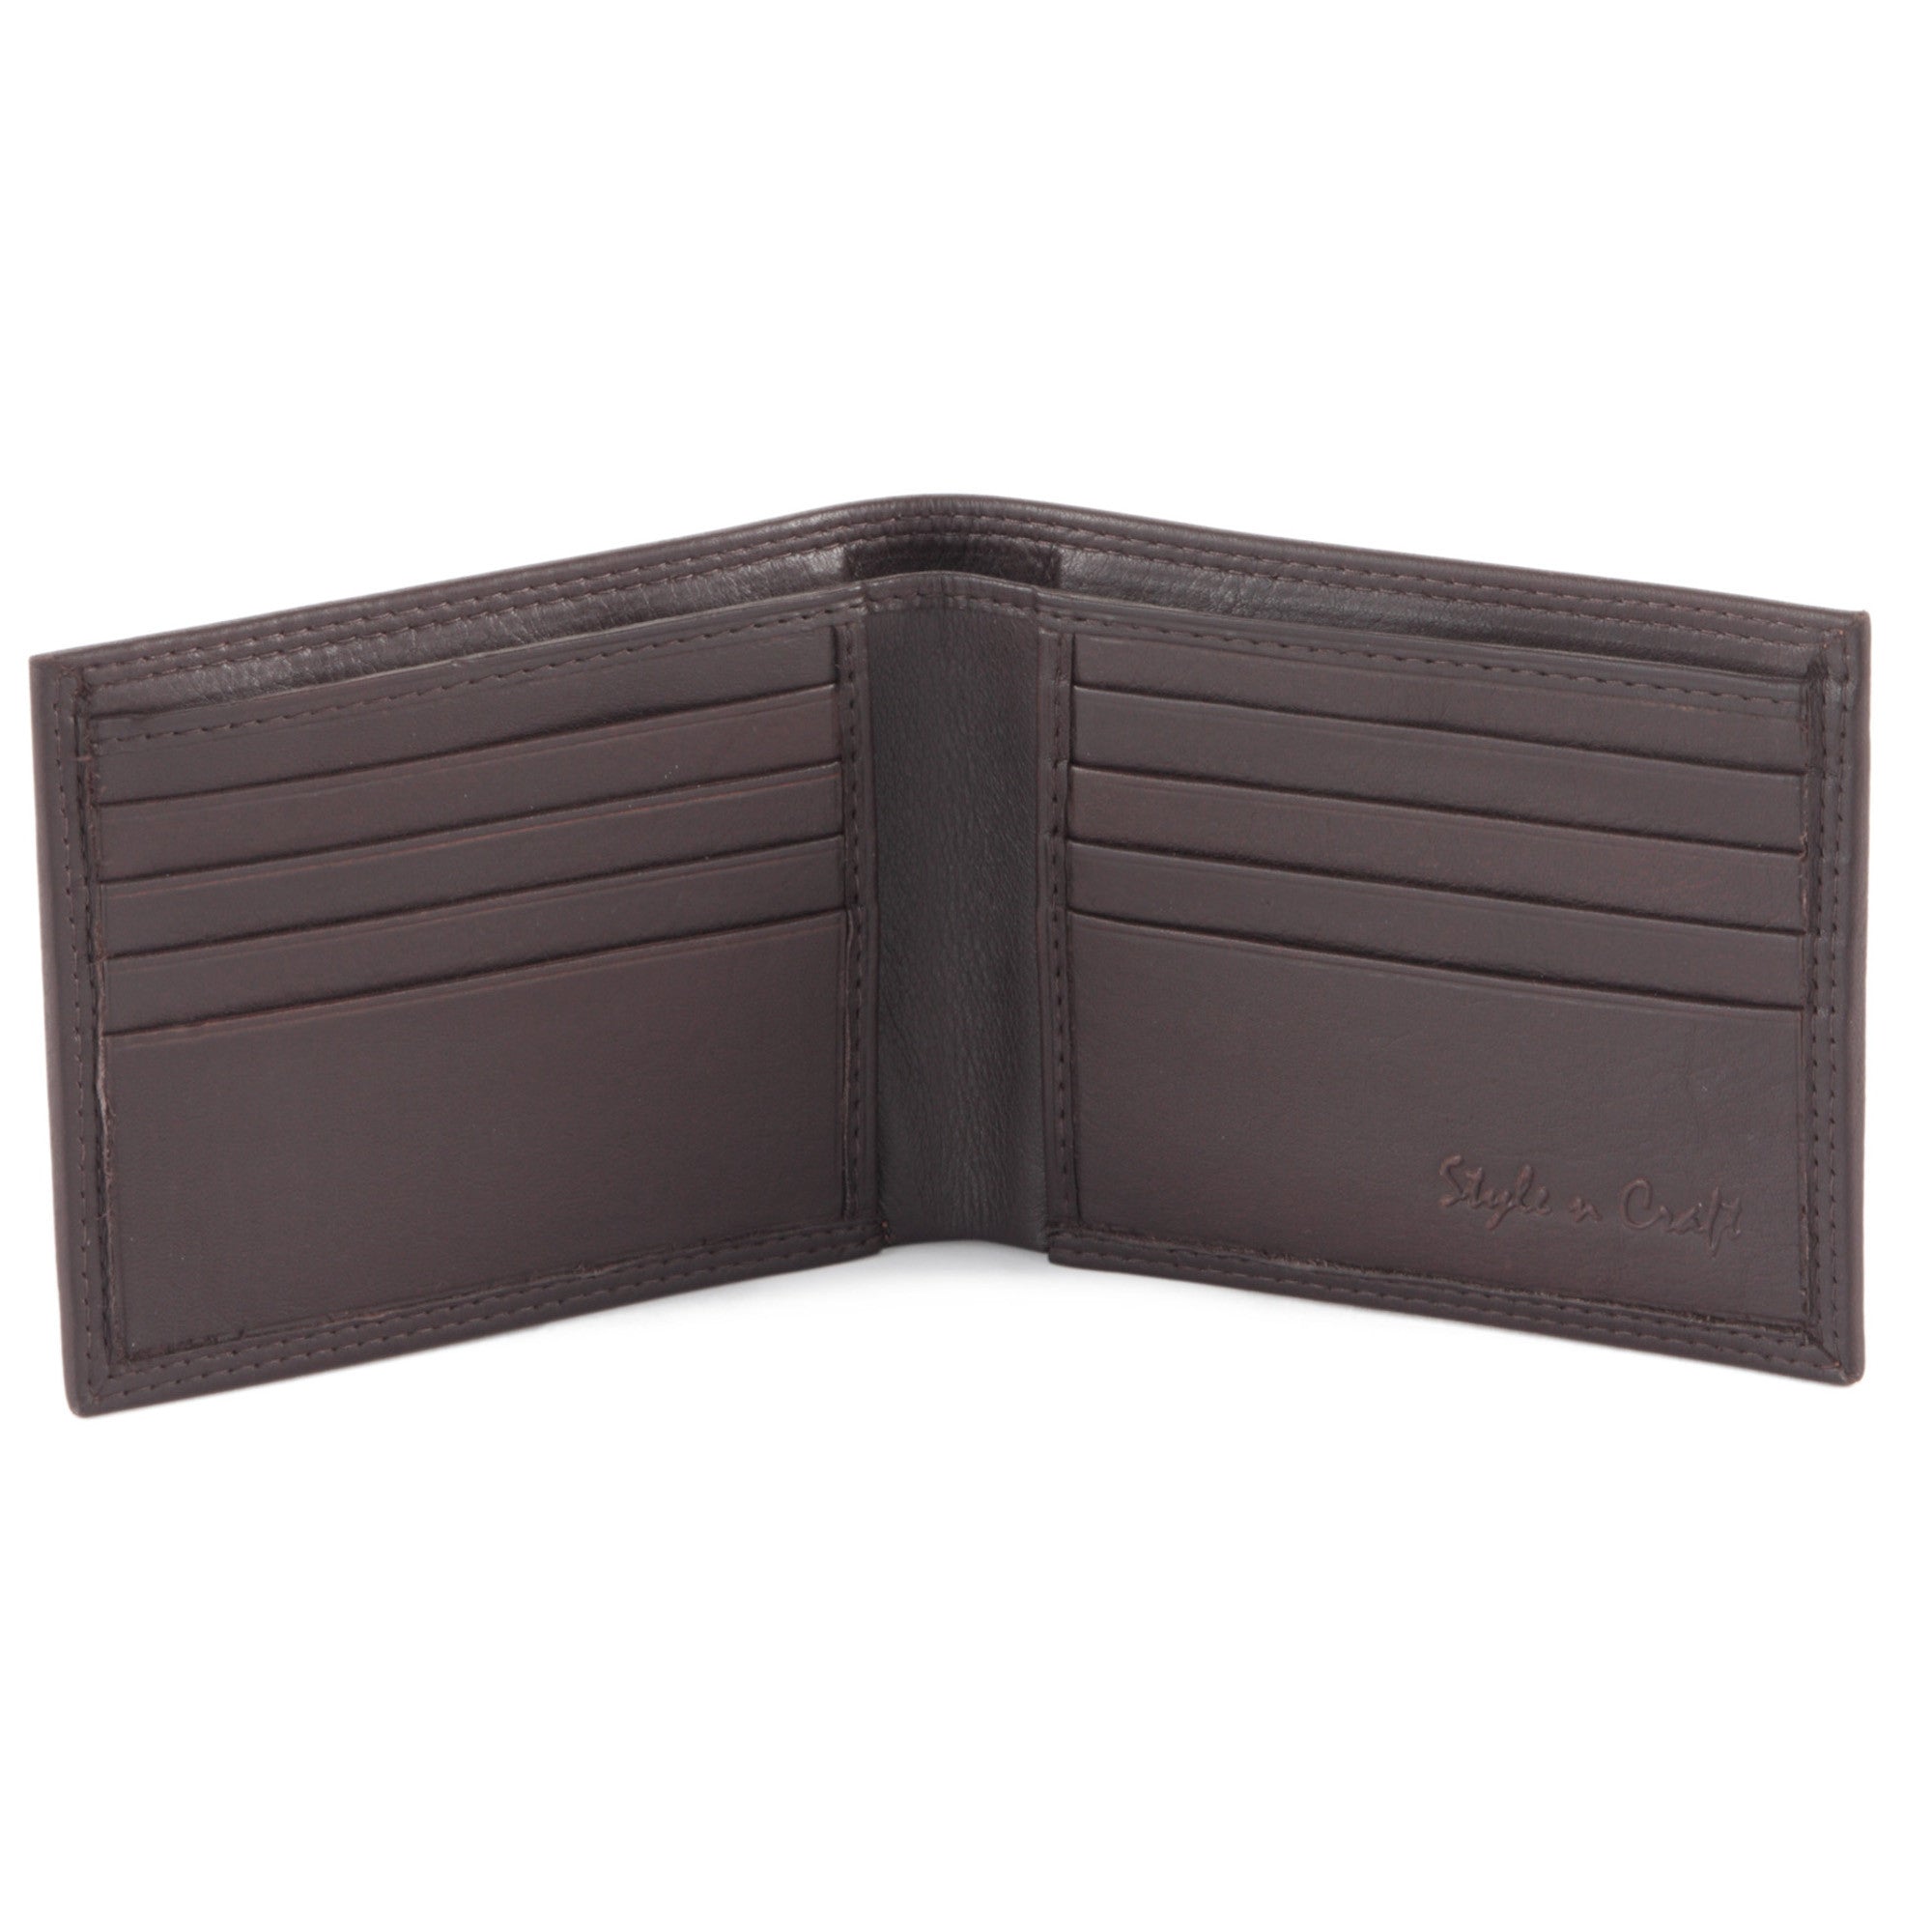 300720-BR Slim Bifold Leather Wallet in Brown | Style n Craft